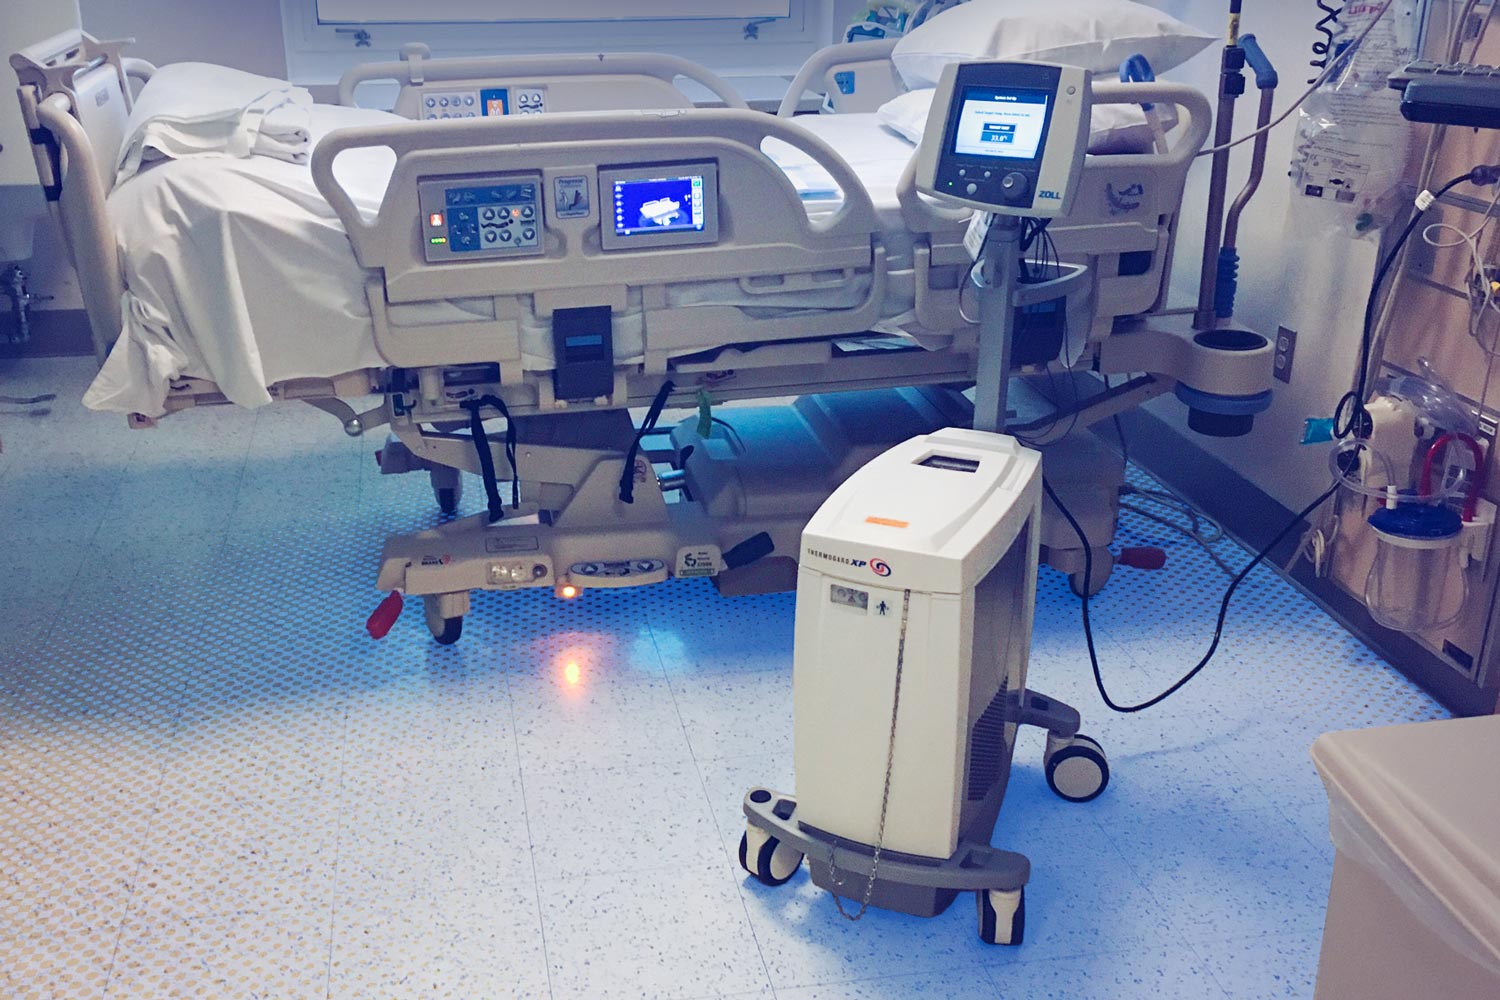 The cooling console in a patient room